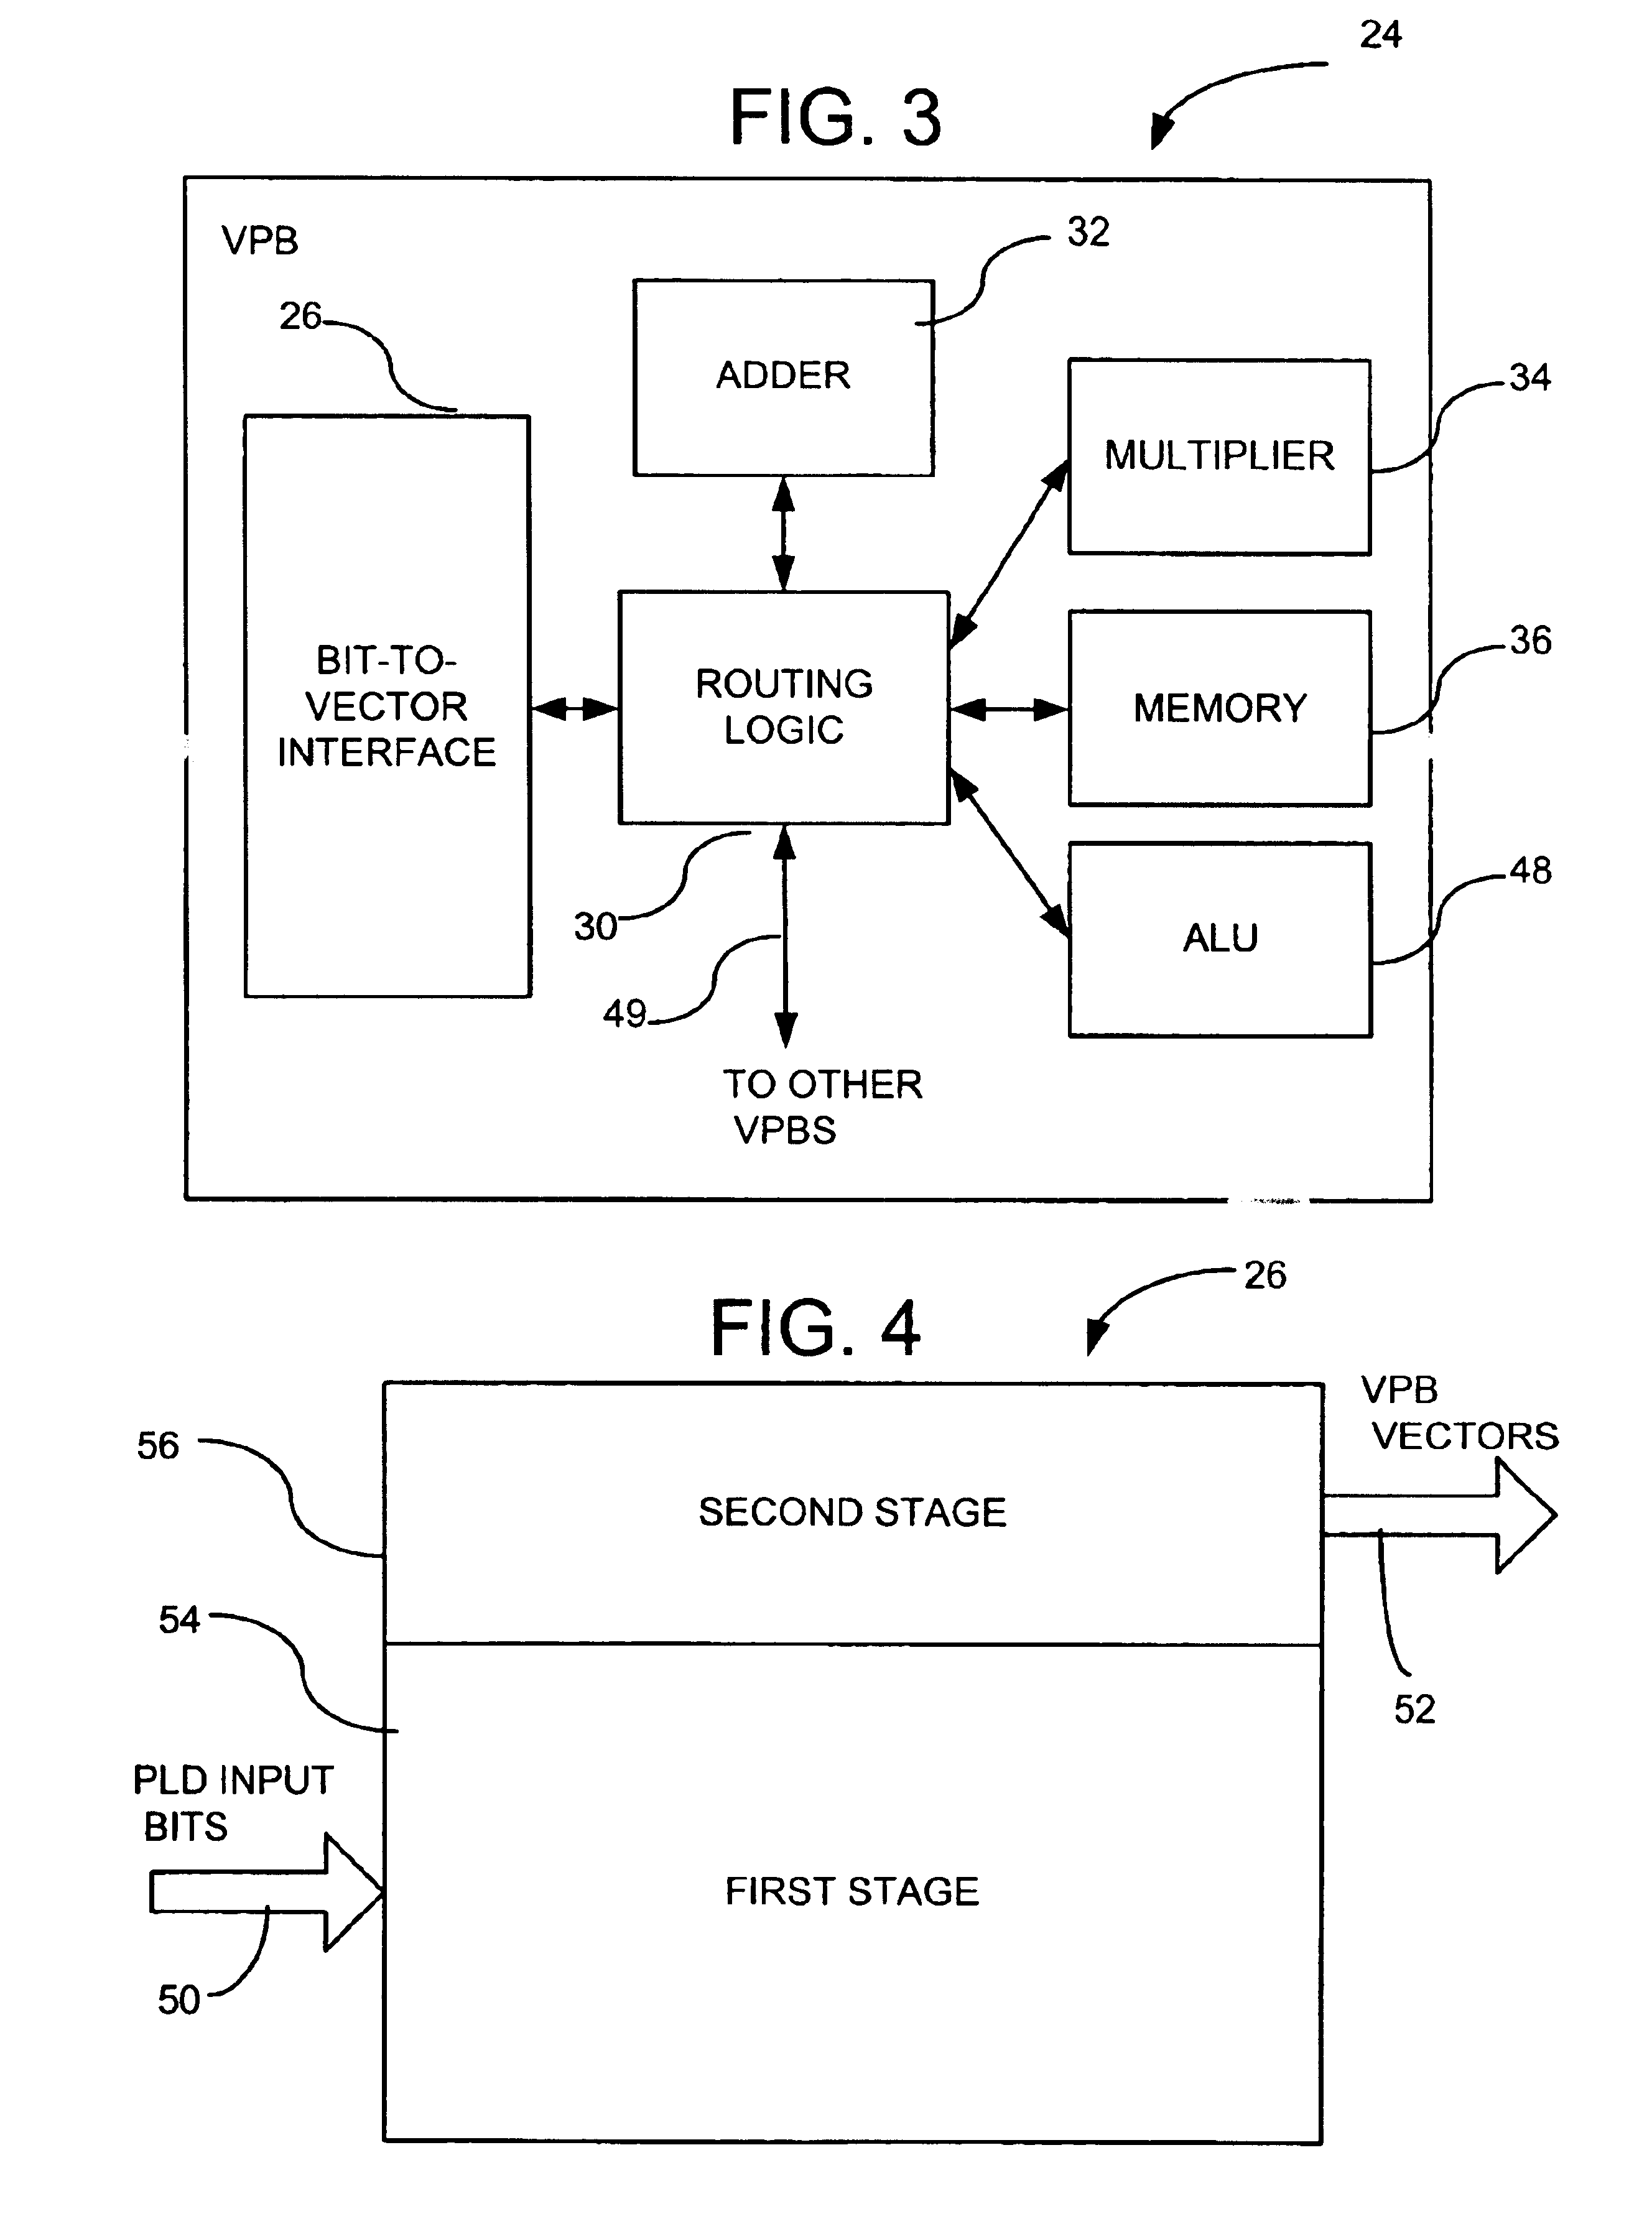 Converting bits to vectors in a programmable logic device